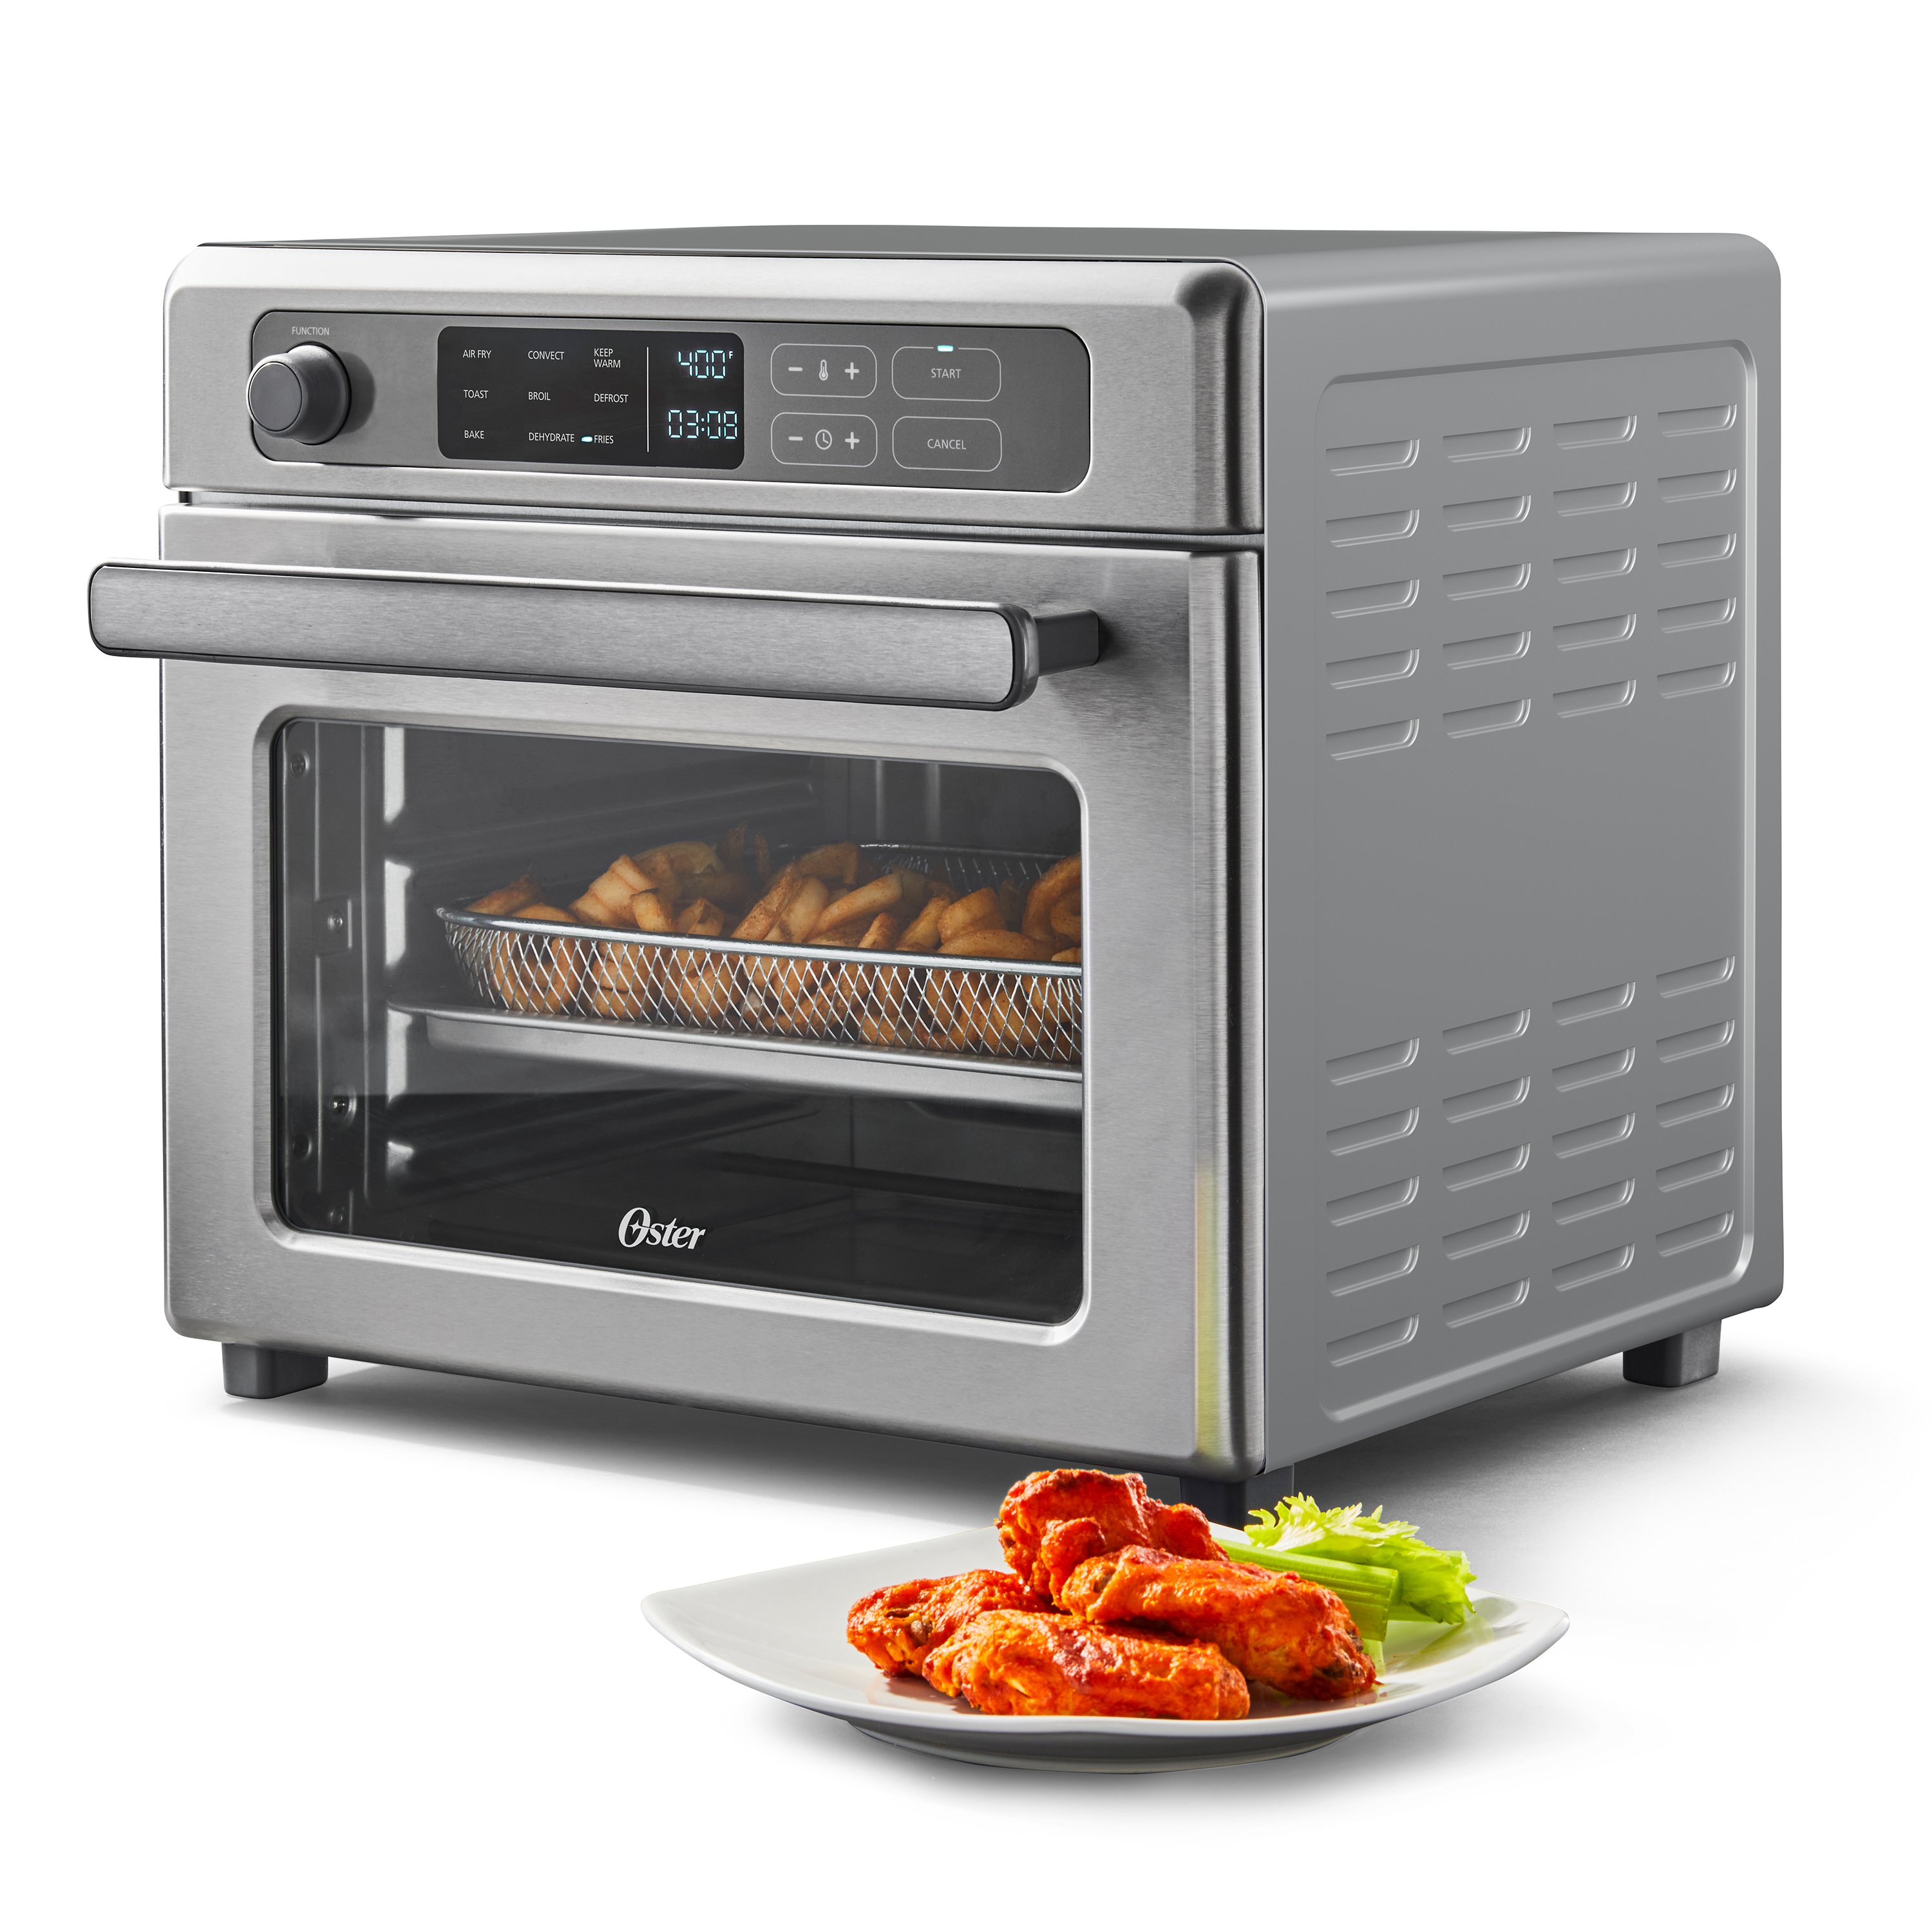 Oster XL Air Fry Digital 10-in-1 1700W French Door Convection Oven 